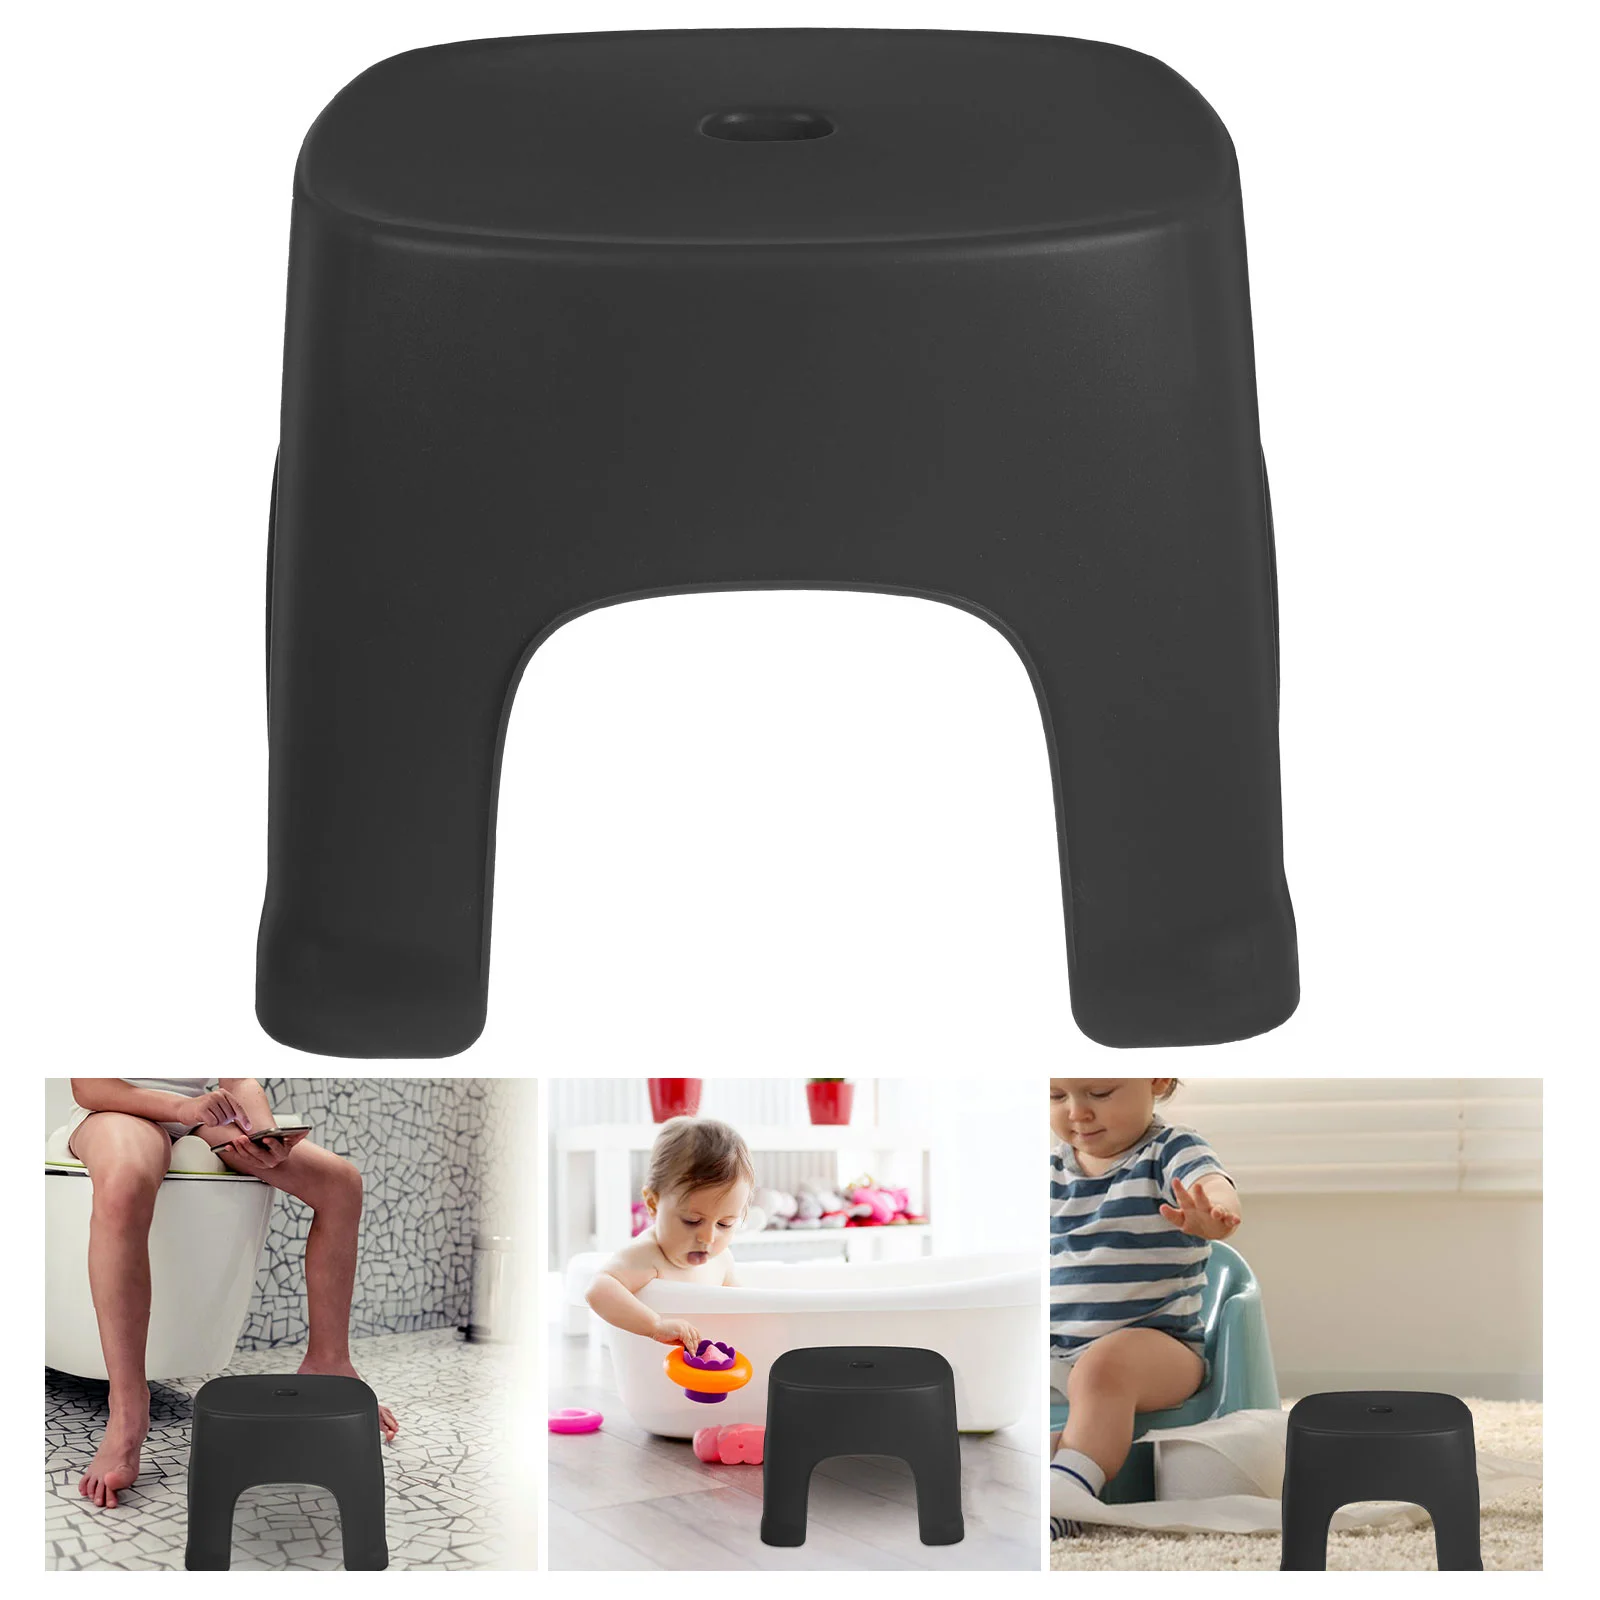 

Low Stool Step Kids Stools Feet Toddler Small Bench Bathroom Pvc Plastic Footstool Adults Toilet Stepping Child Steps